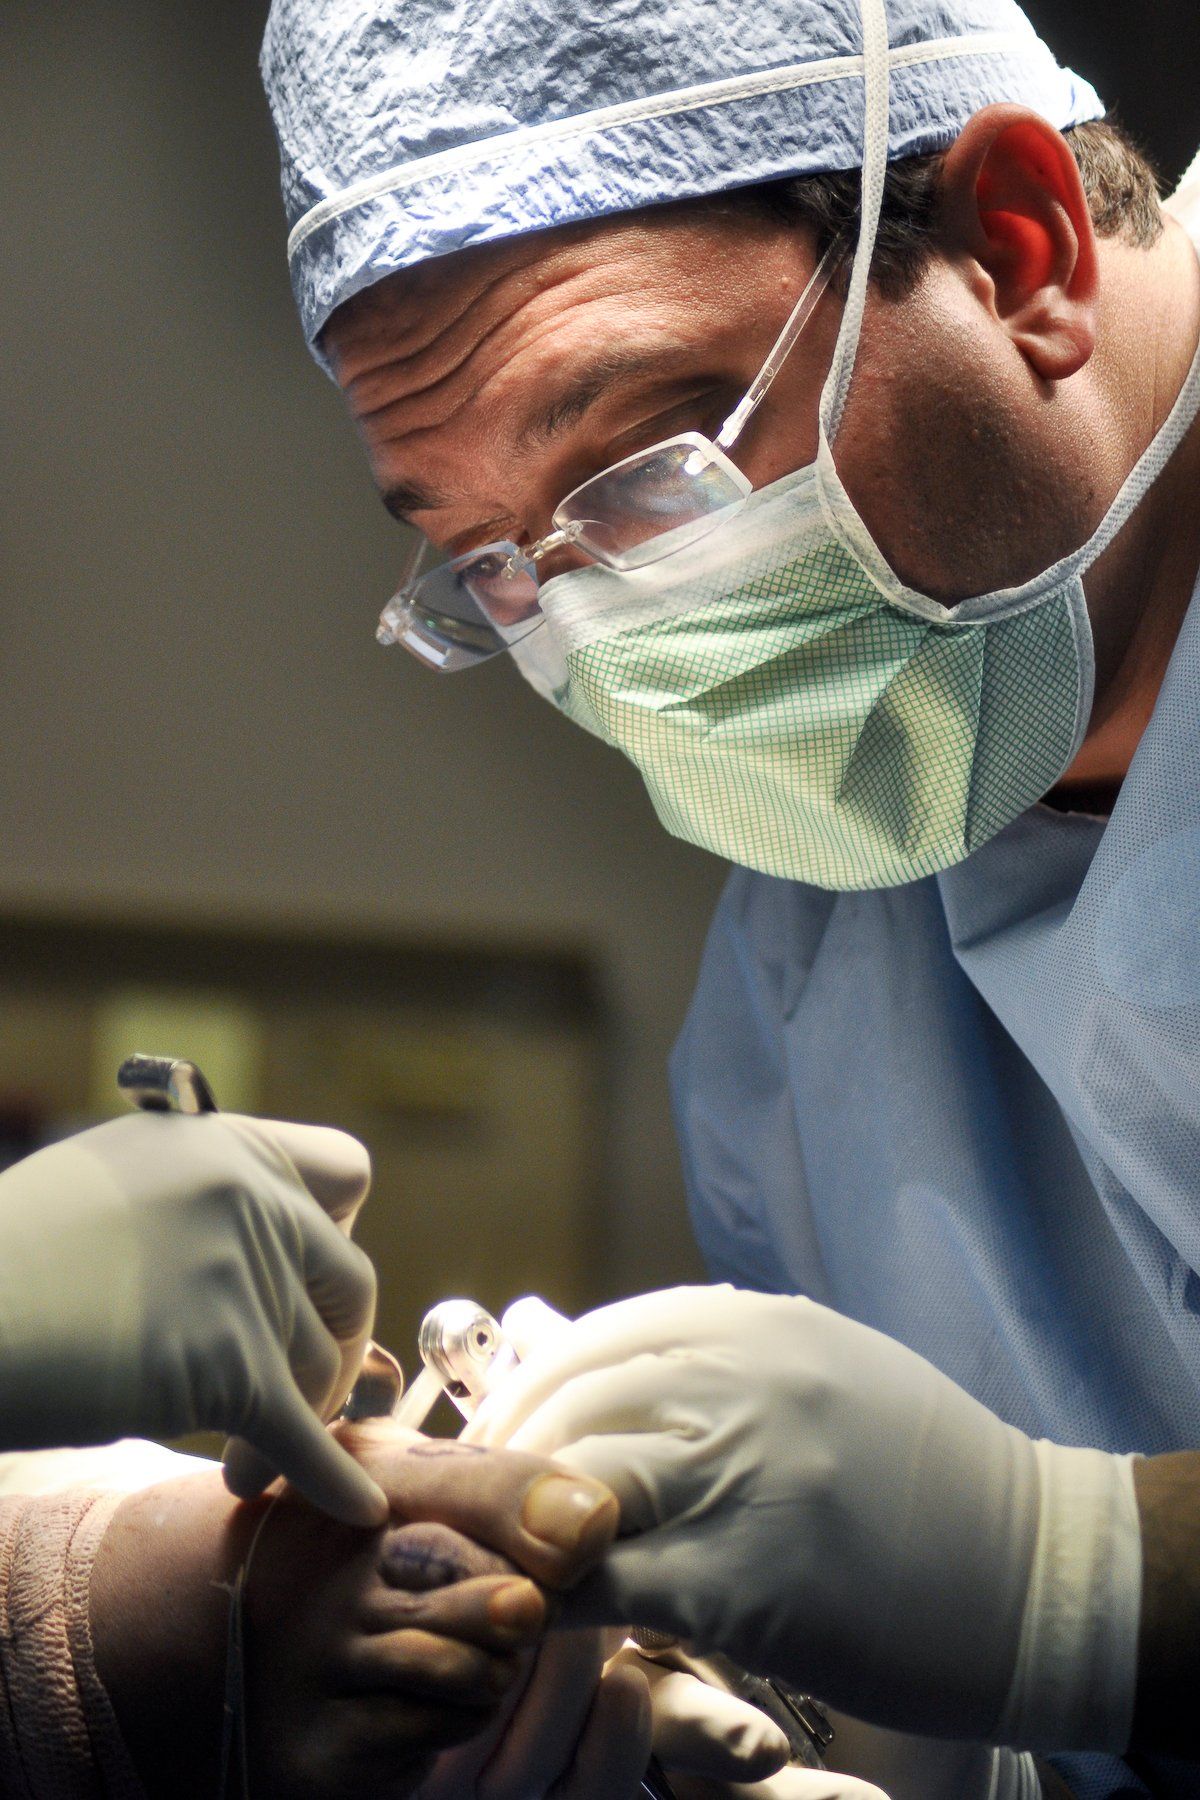 Experienced surgeons performing surgery